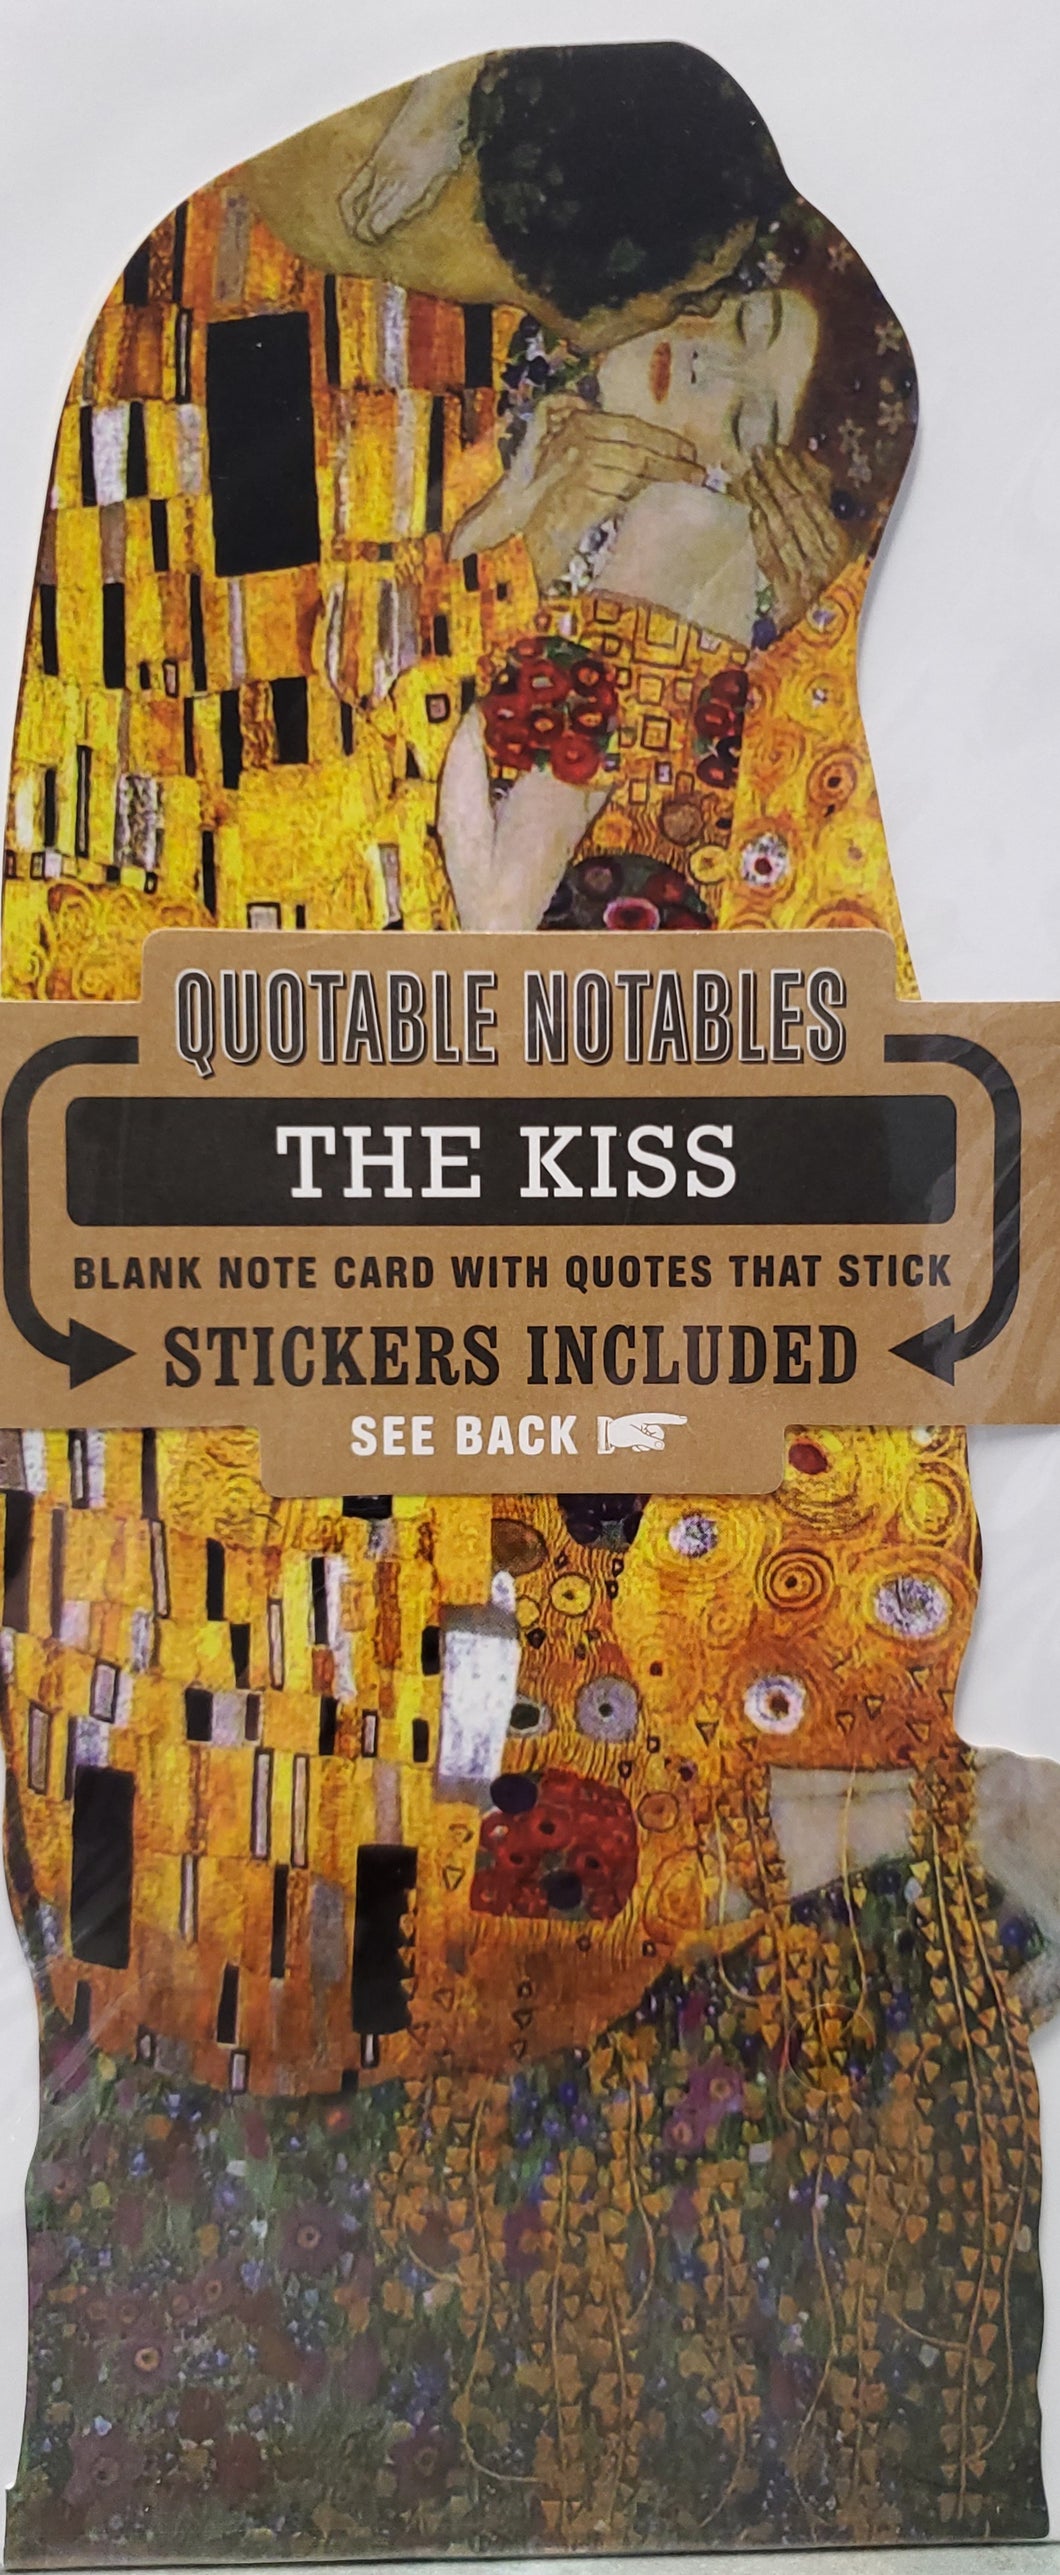 Card-Quotable Notables-The Kiss